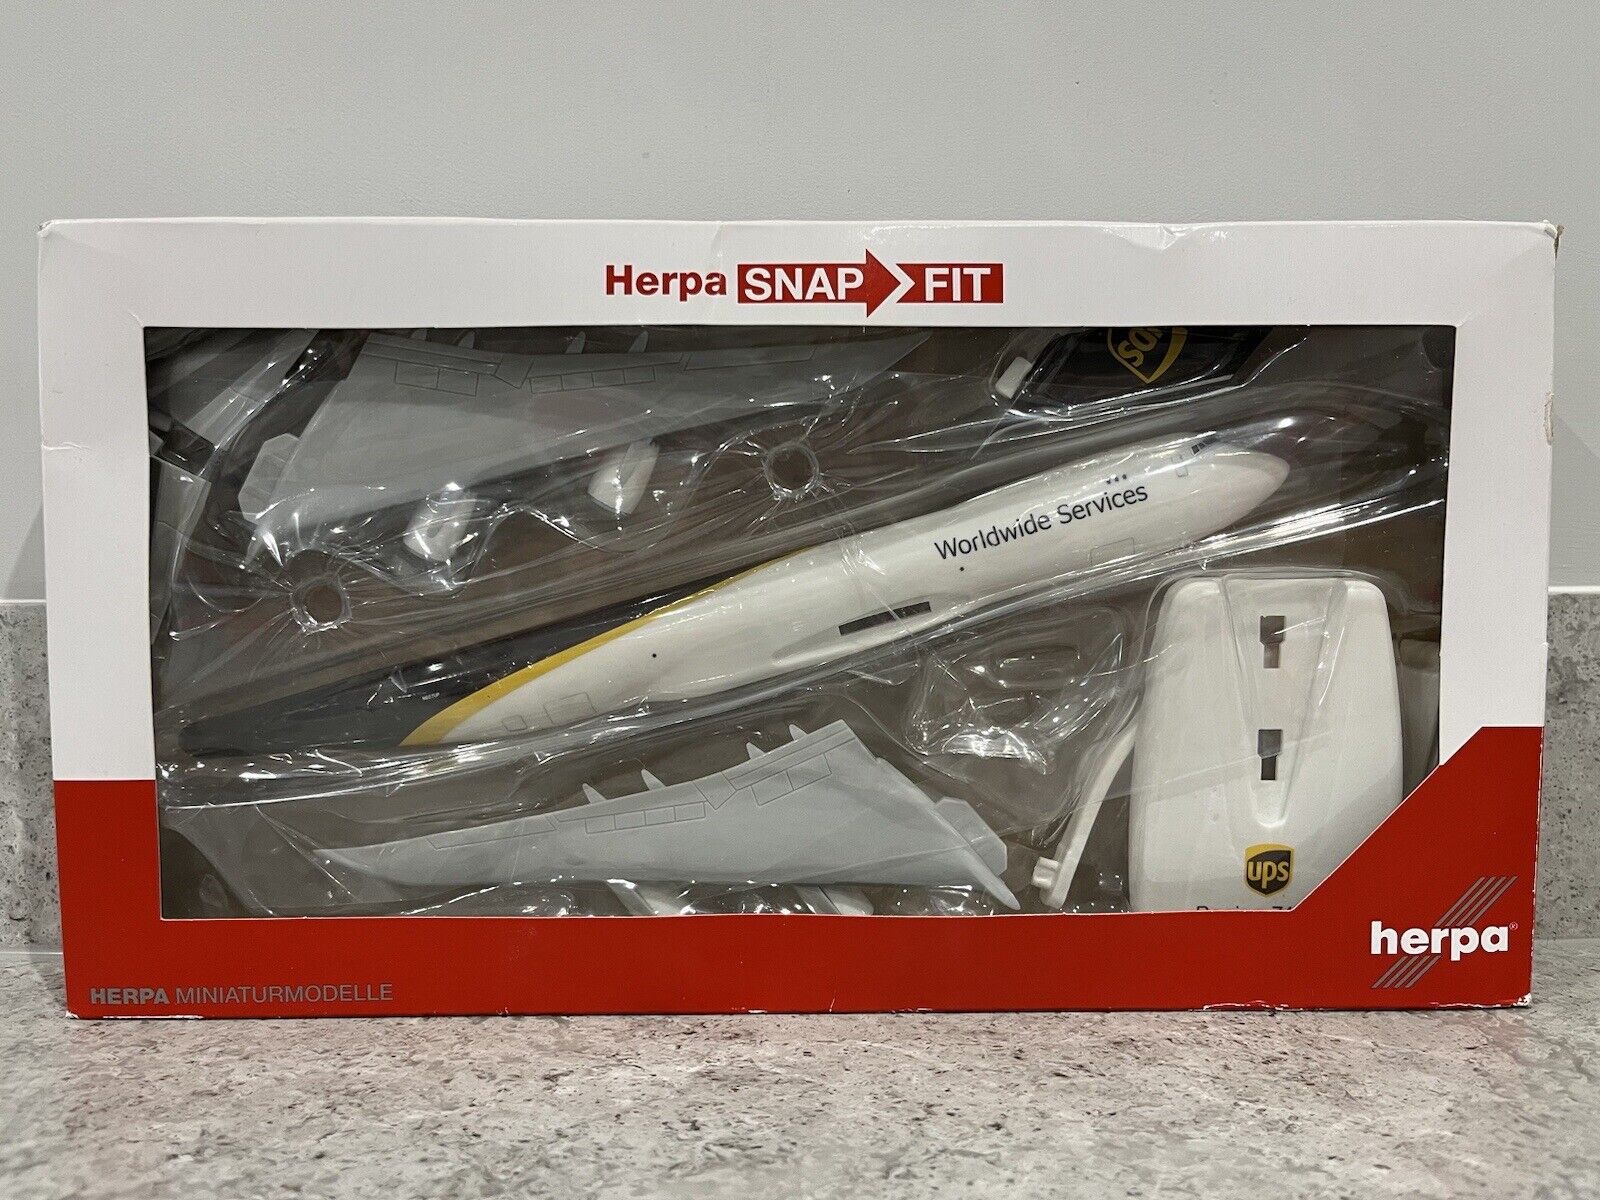 Herpa Snap-Fit - Boeing 747-8F - UPS - Aircraft Model - 1:200 - Mint/Brand New